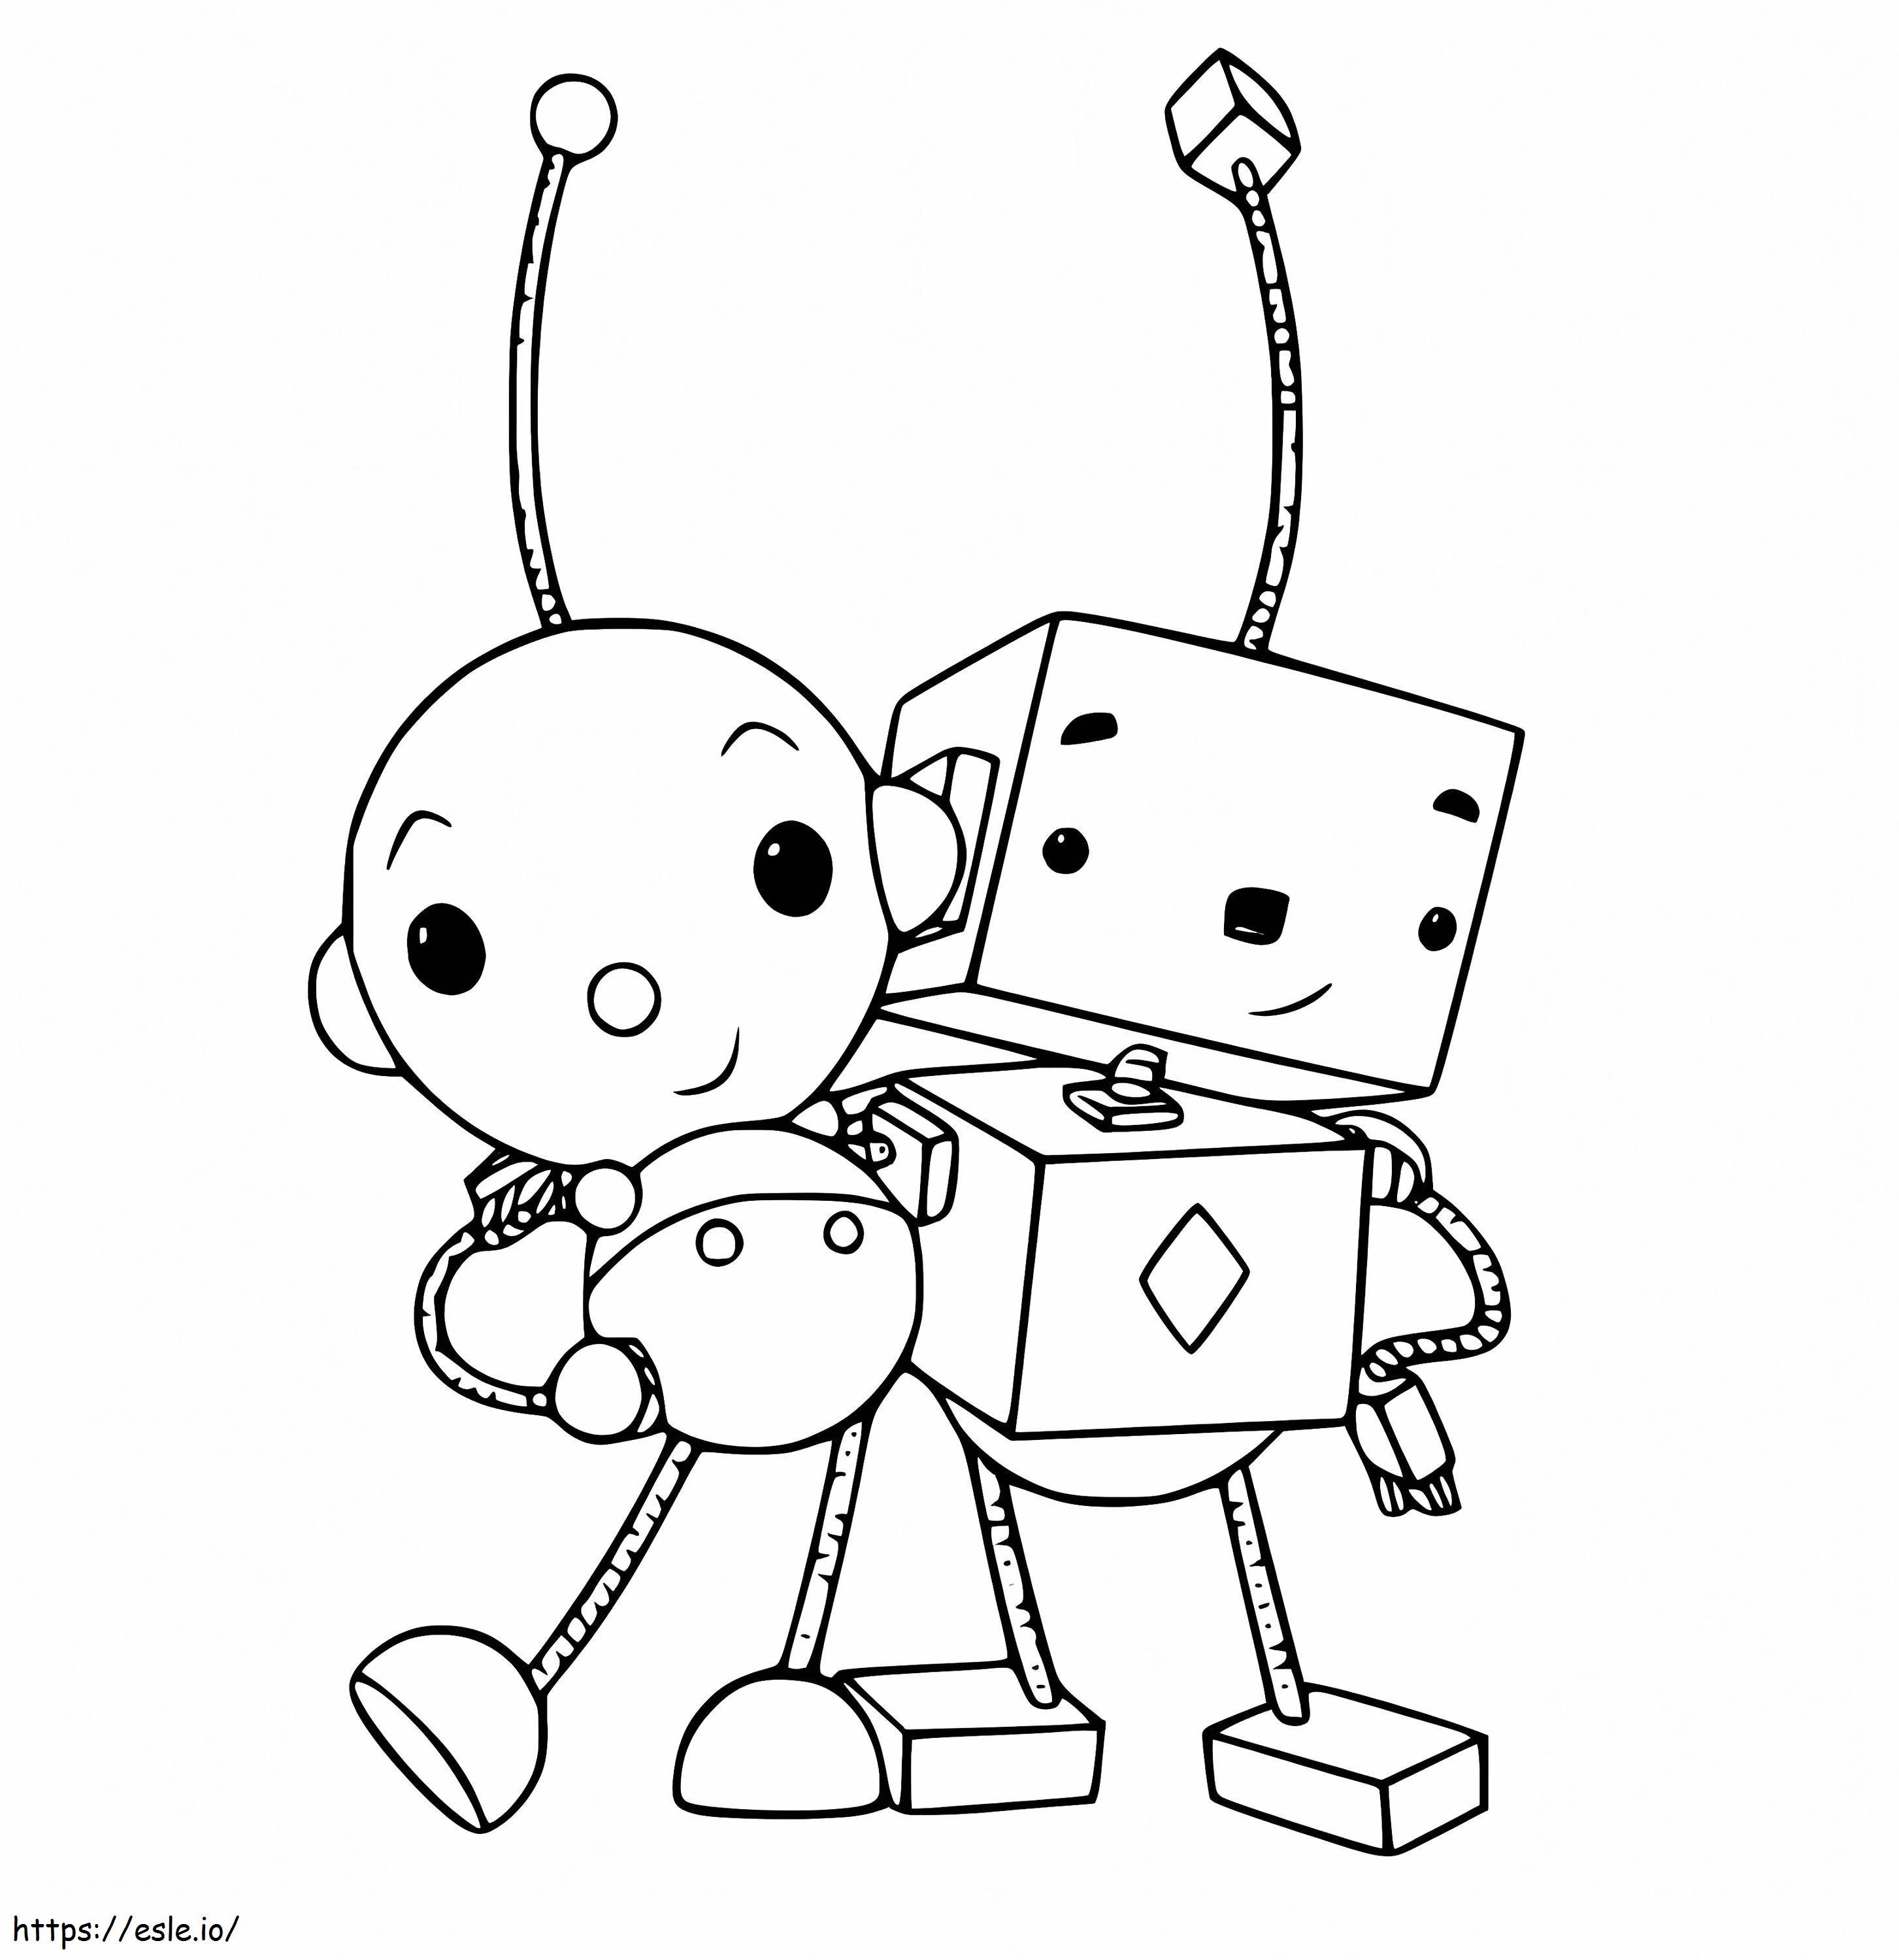 Olie Polie And Billy Bevel coloring page